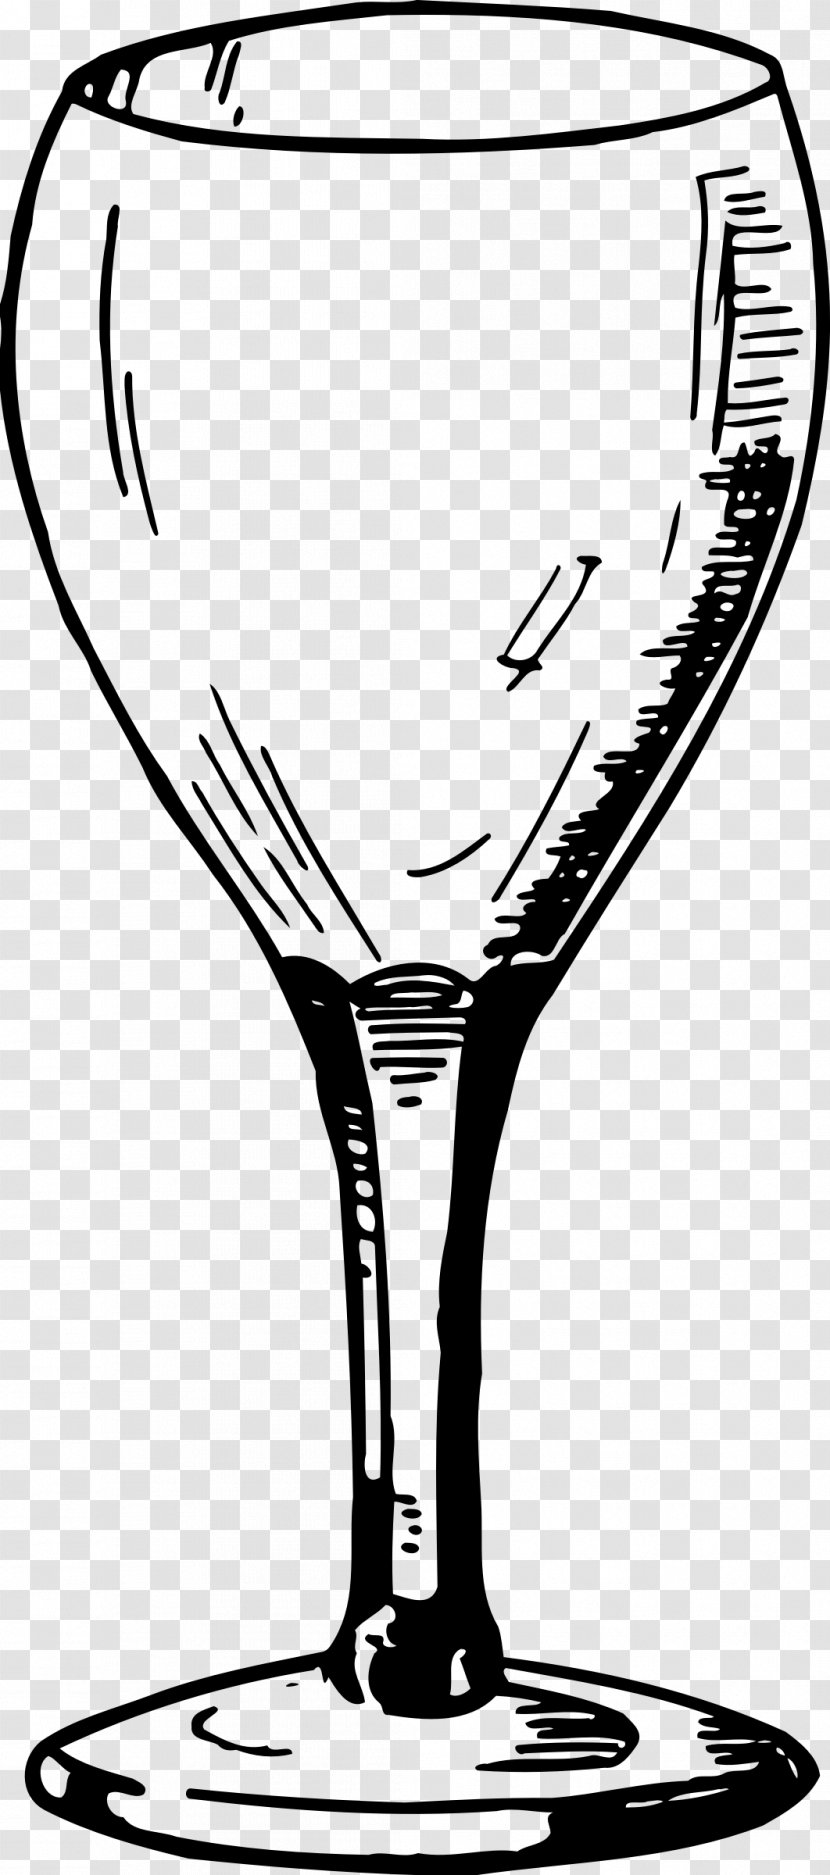 Wine Glass Champagne Stemware - Cocktail - Wineglass Transparent PNG